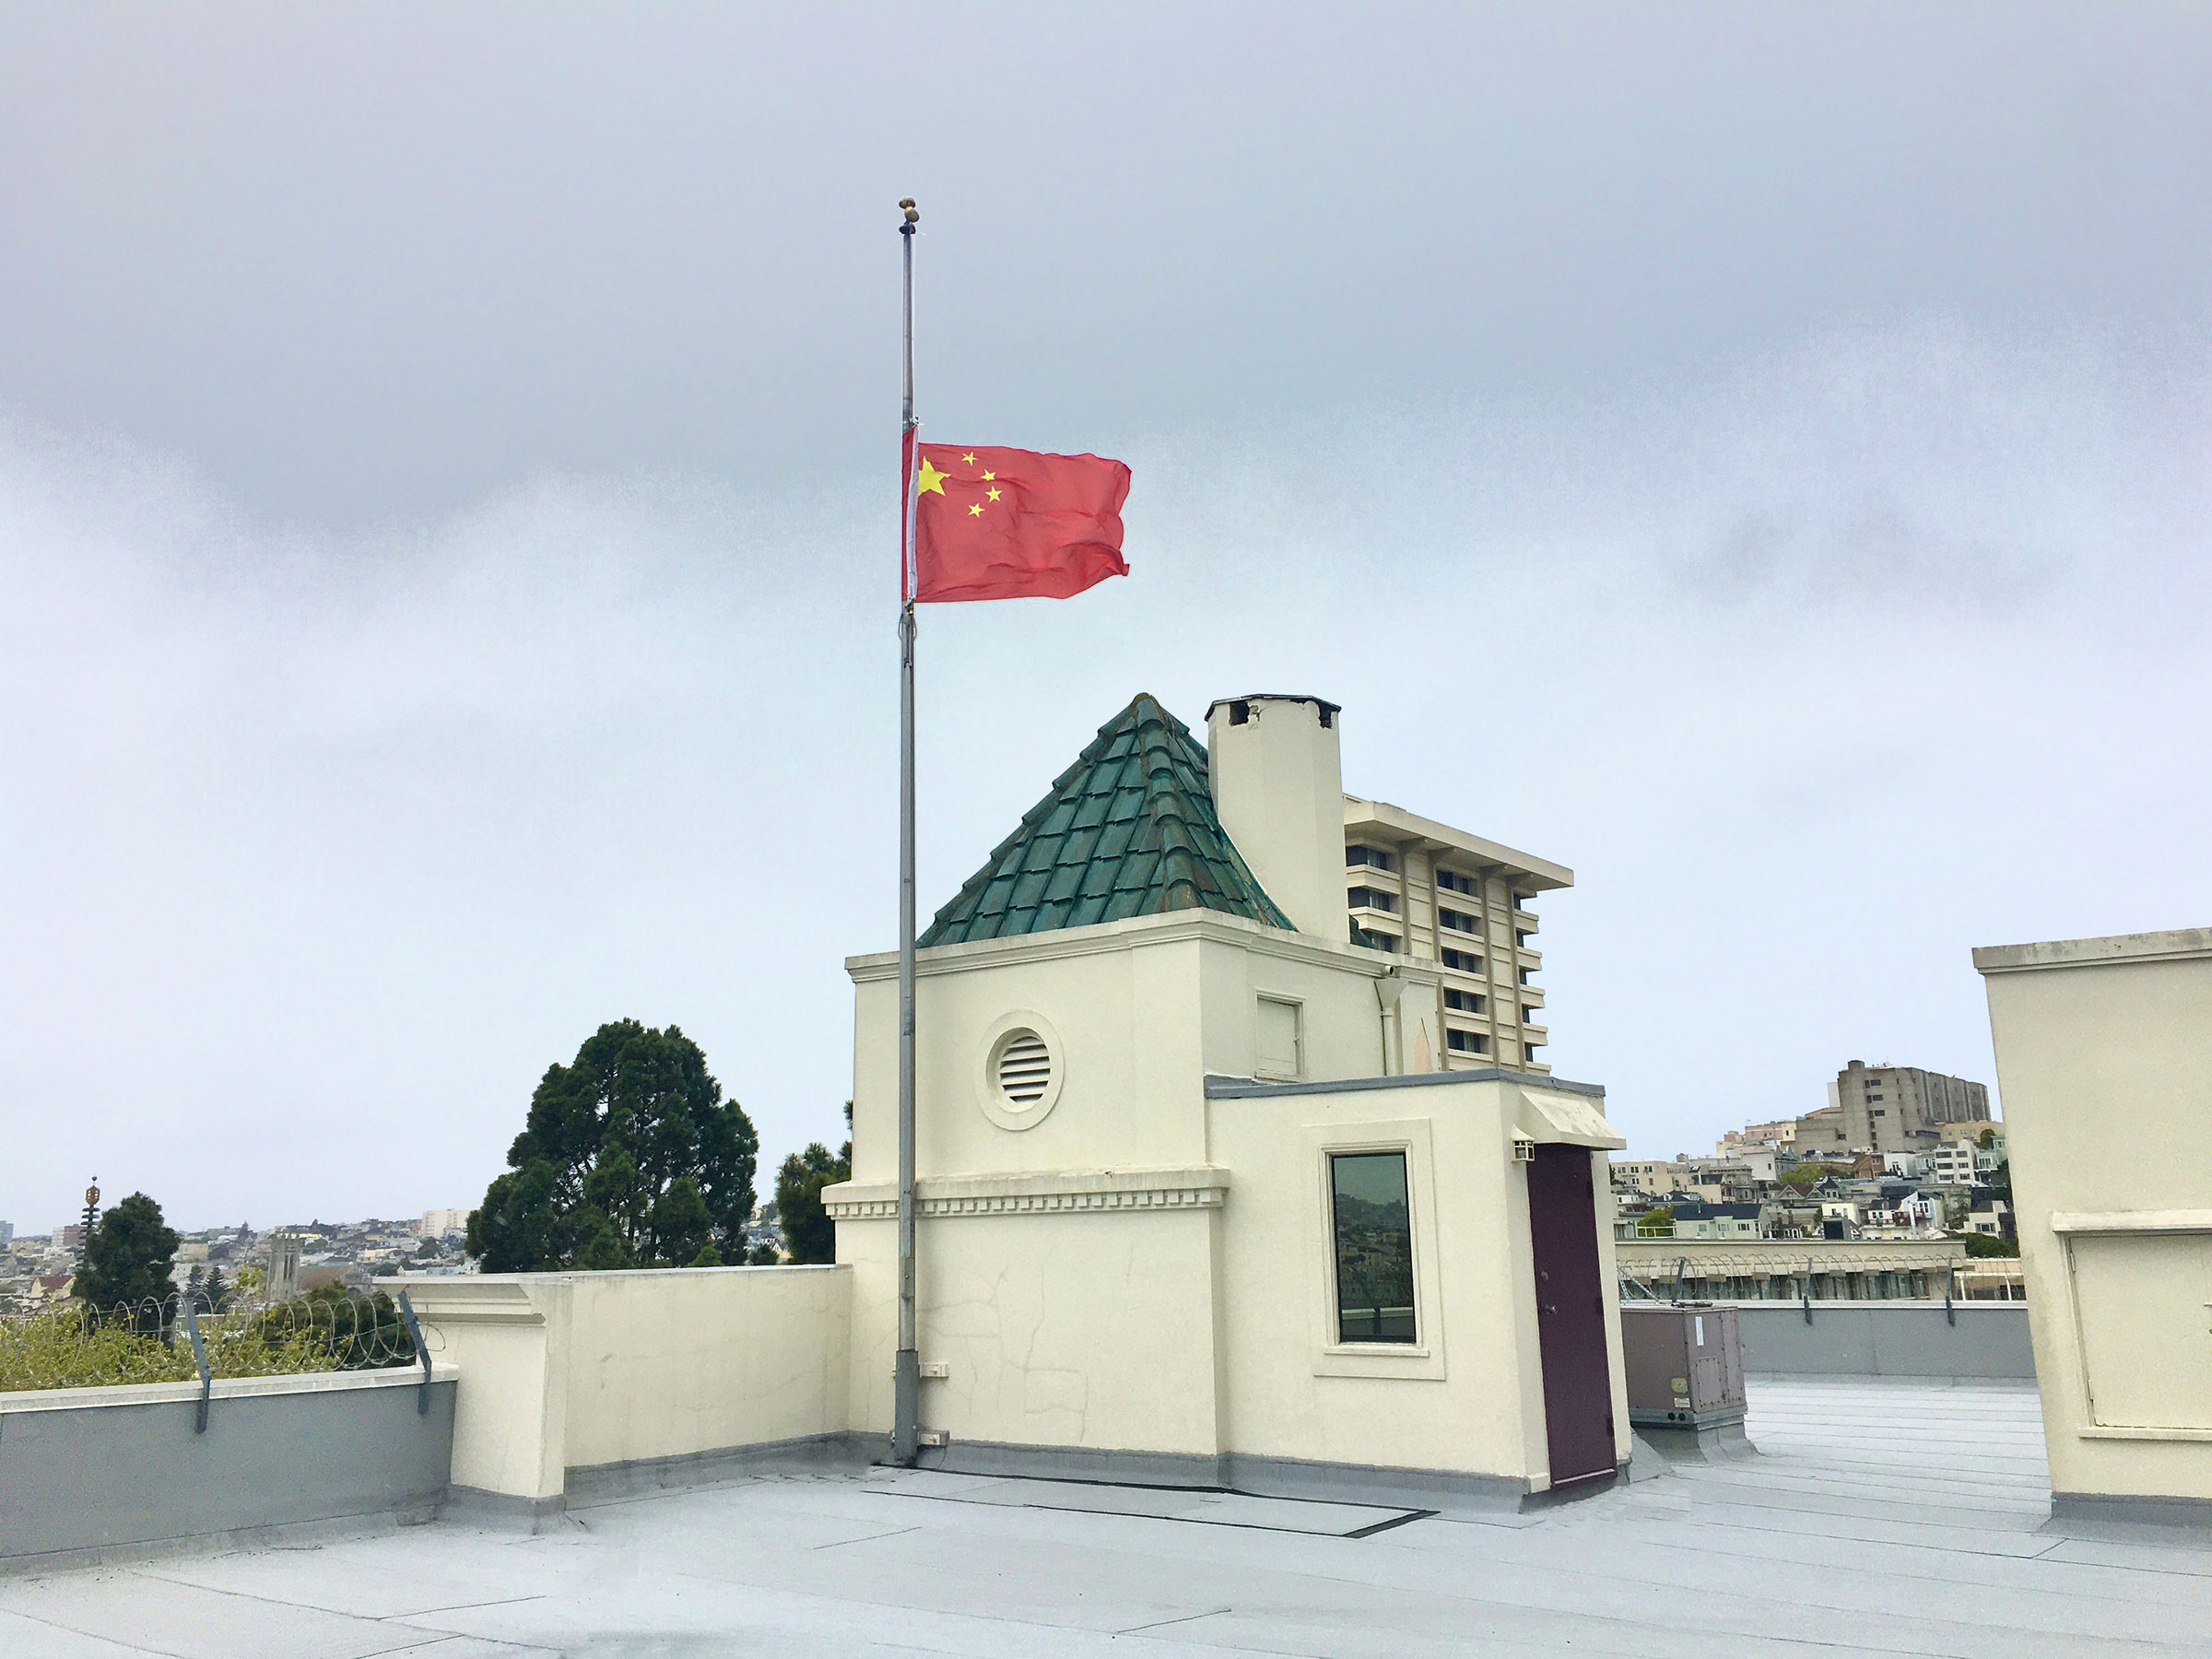 A Chinese national flag flies at half-mast to mourn for people who died in the fight against COVID-19 at the Consulate-General of the People's Republic of China in San Francisco on April 4, 2020. (Chinese Embassy to U.S./Handout/Xinhua/SIPA)